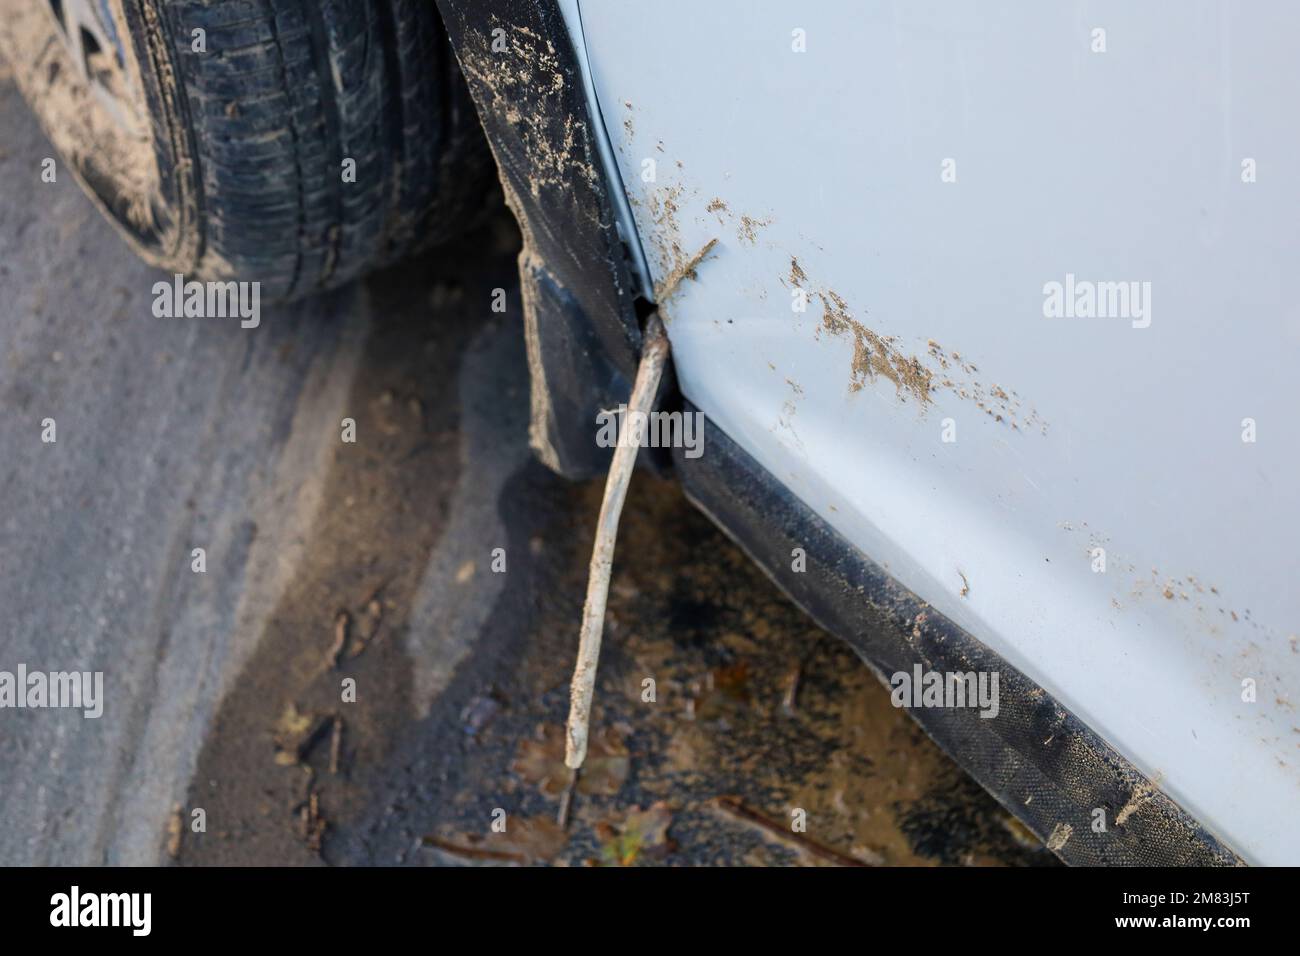 Santa Barbara, California, U.S.A. 11th Jan, 2023. A stick stuck in the seal of a white, 2019 Suburu Forester on January 11, 2023, with All-wheel drive and X-Mode activated, was no match for a mountain stream that gushed across the Rancho Oso Horse Ranch and Campground driveway in the Los Padres National Forest on January 9th. Context: The Santa Barbara Fire department pulled it out of the muck and parked it out of the way of other vehicles, but a tow truck has not been able to reach it. AAA Insurance agents have not been able to have it inspected, but expect it will be a total loss, as on Stock Photo